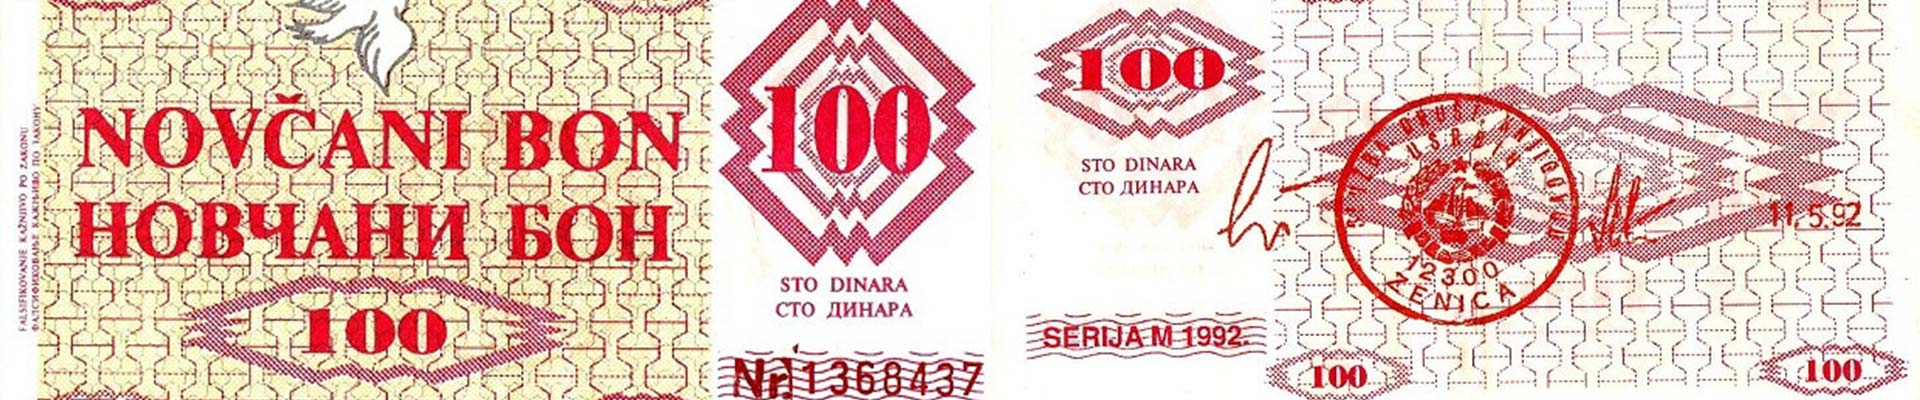 History of and Key Counterfeit Identifiers for Local Provisional Novčani Bon Notes header image